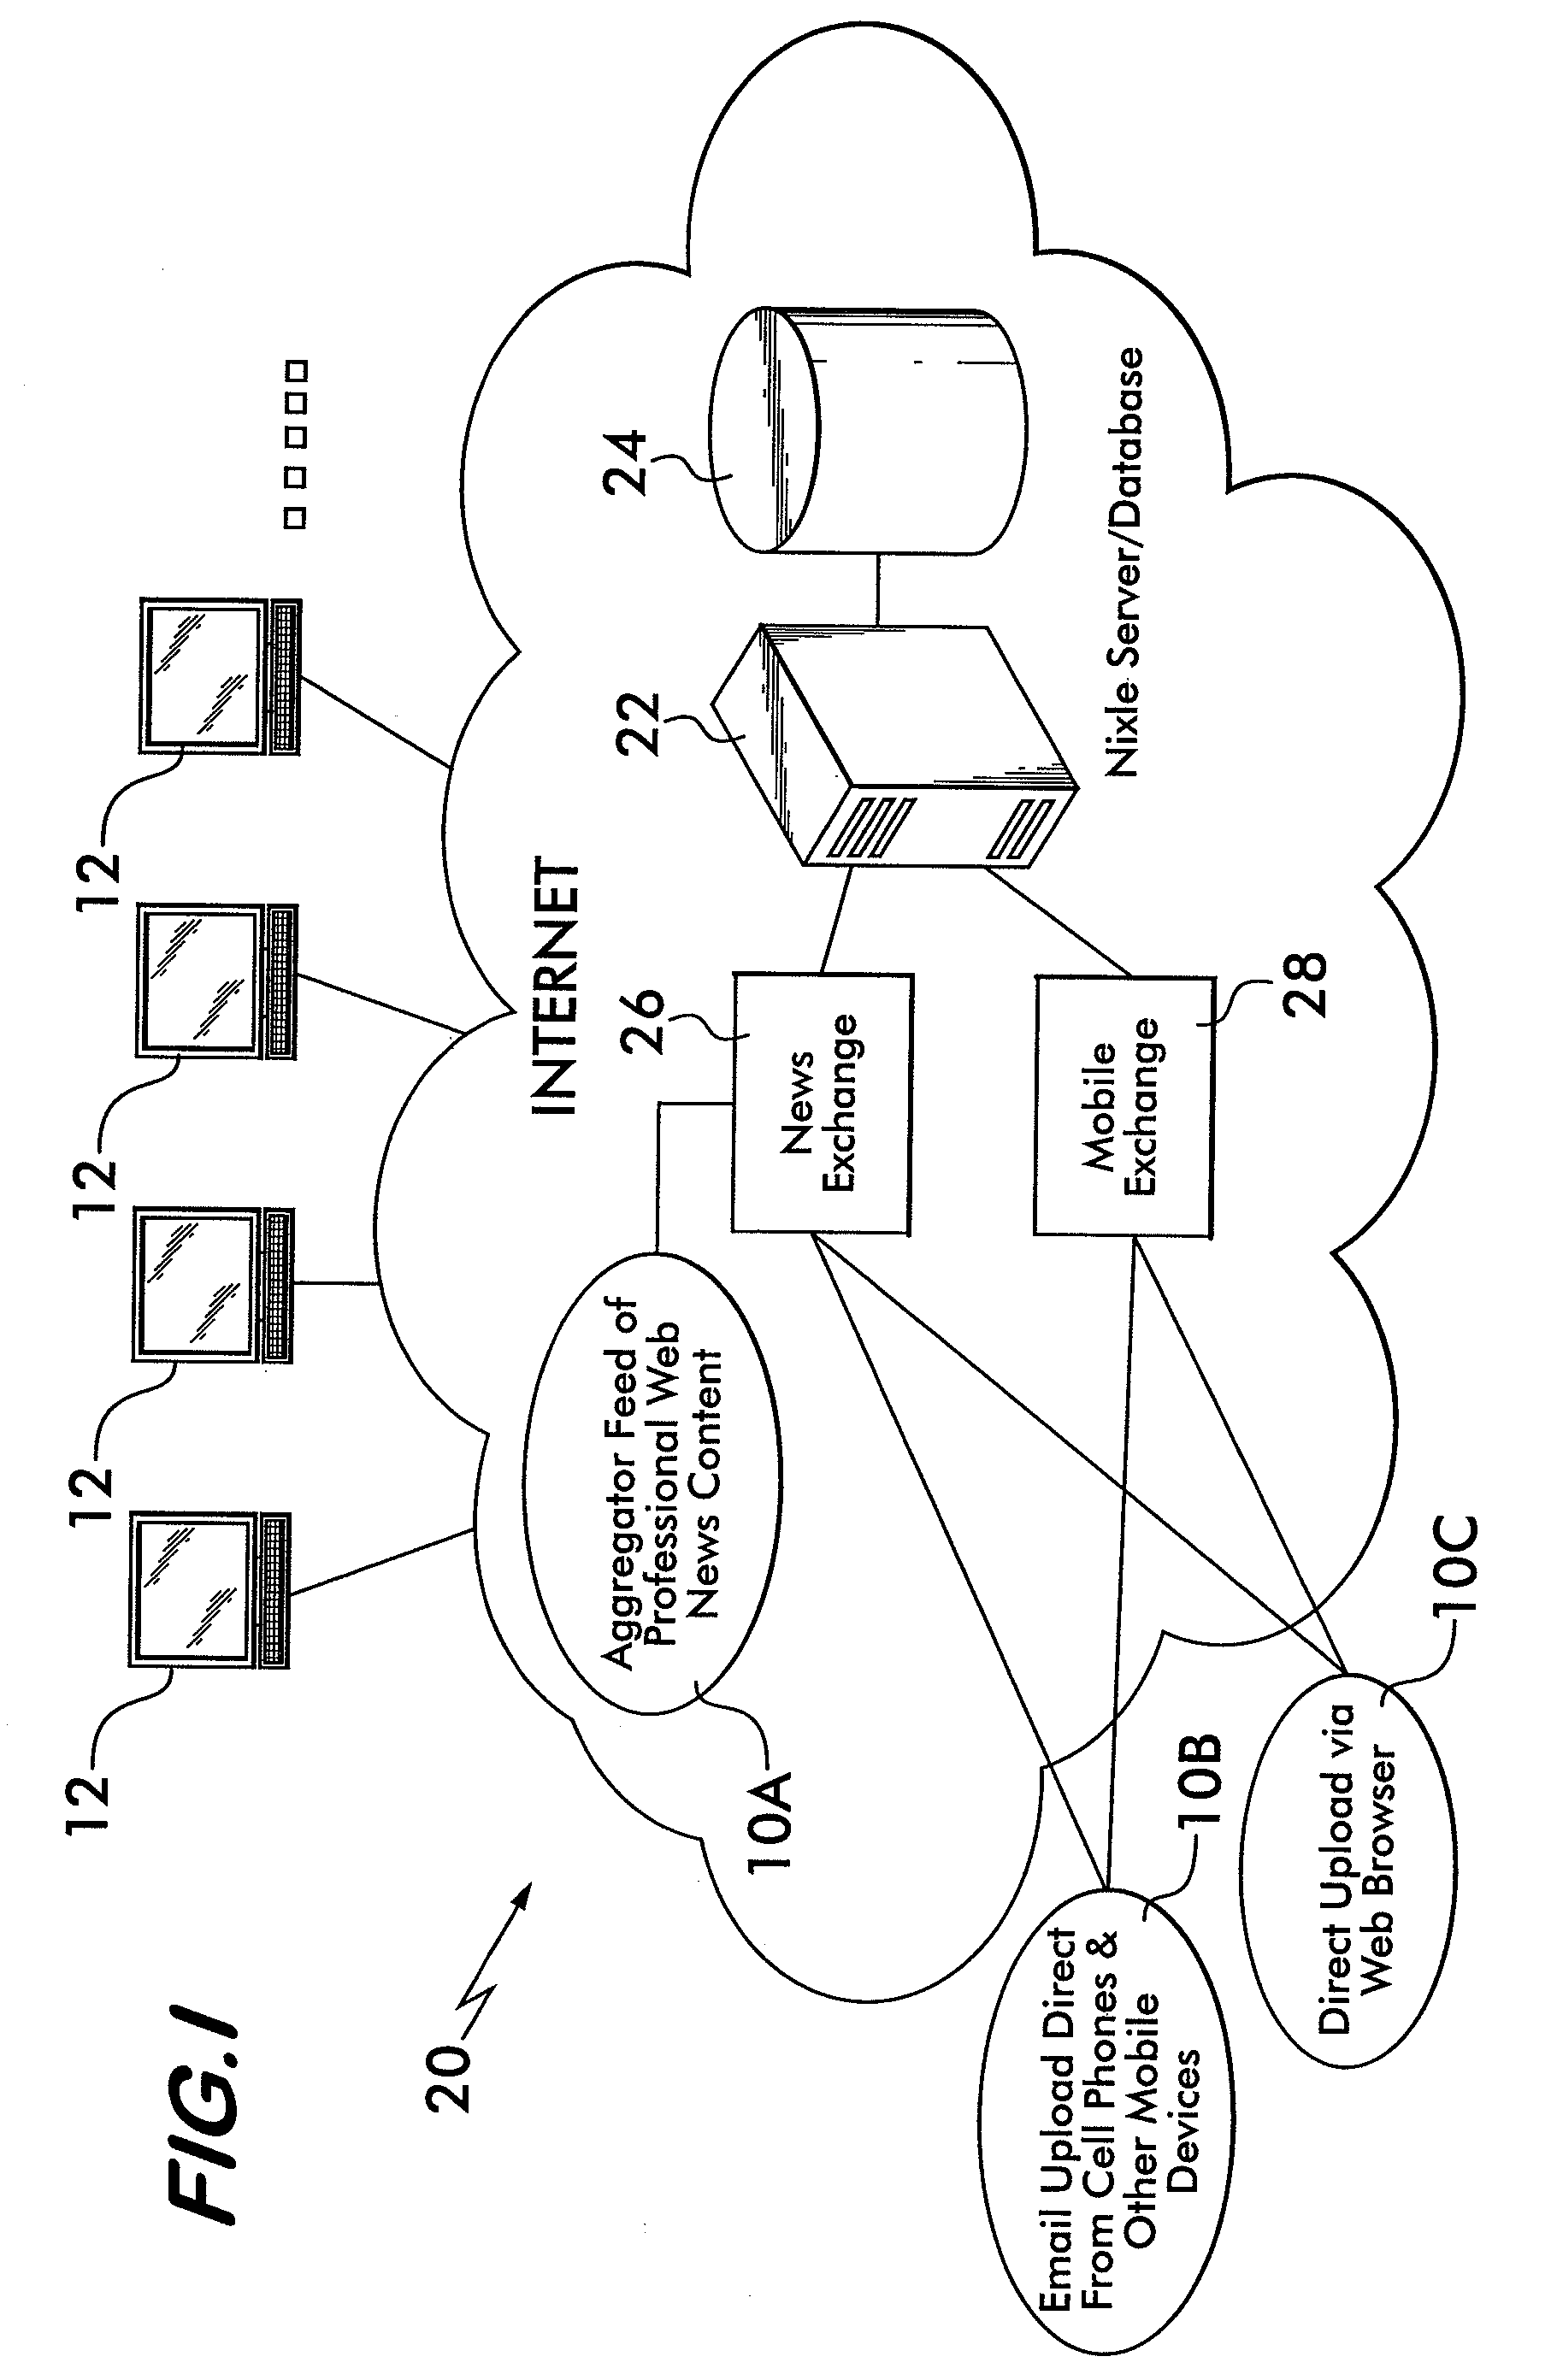 System and Method for Permitting Geographically-Pertinent Information to be Ranked by Users According to Users' Geographic Proximity to Information and to Each Other for Affecting the Ranking of Such Information